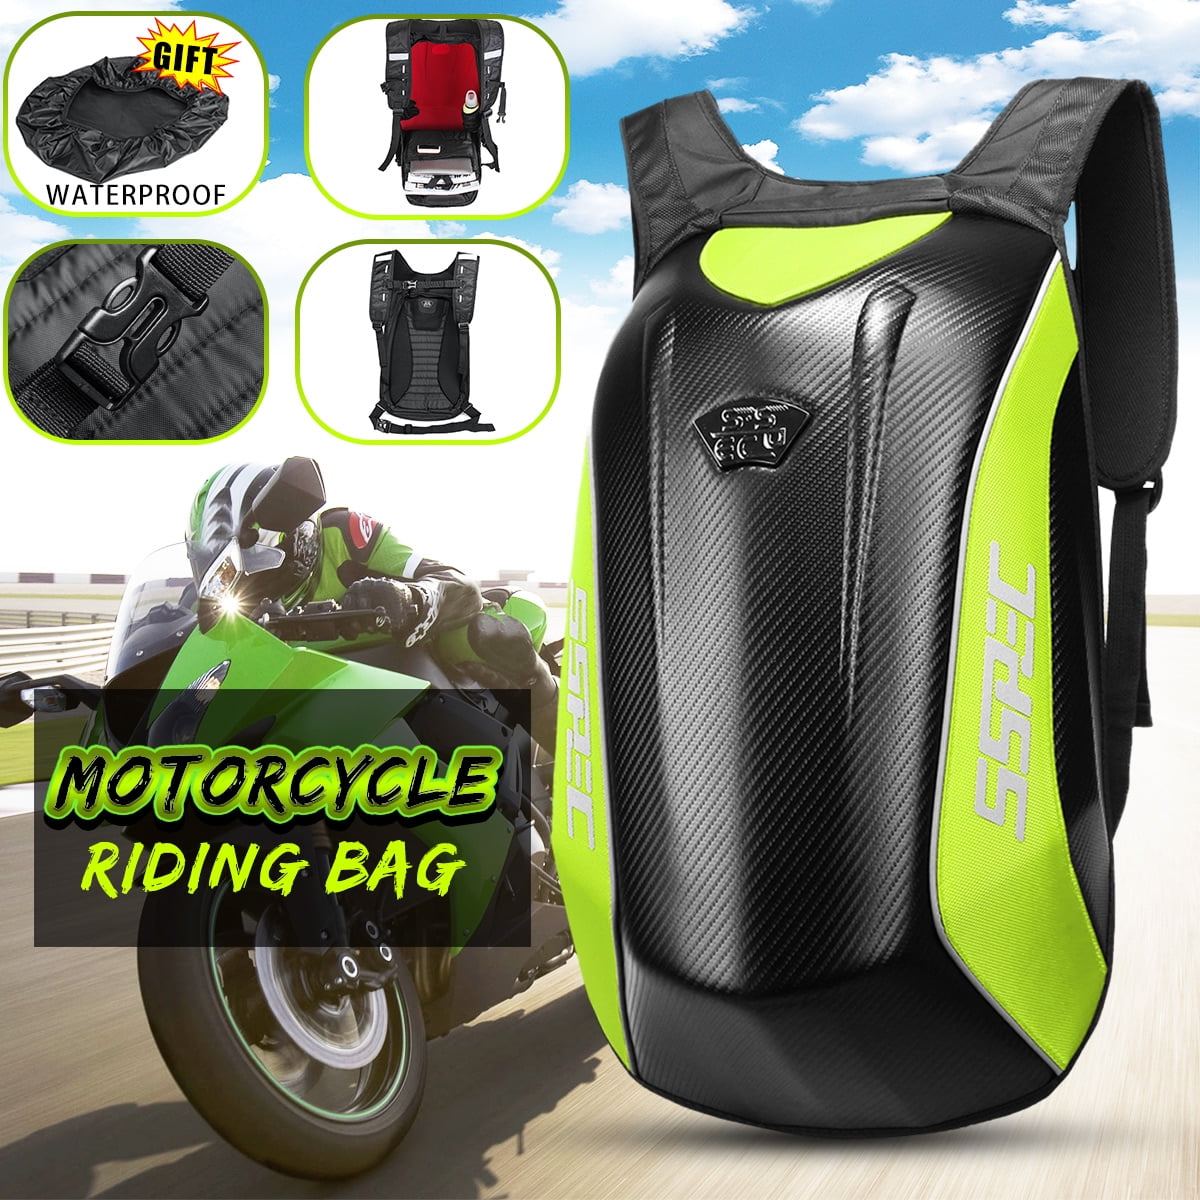 Motorcycle Backpack Waterproof Bag Hard Shell Backpack Carbon Fiber Riding Backpack motorcycle Luggage bags Large Capacity For Travelling Camping Cycling Storage Bag 